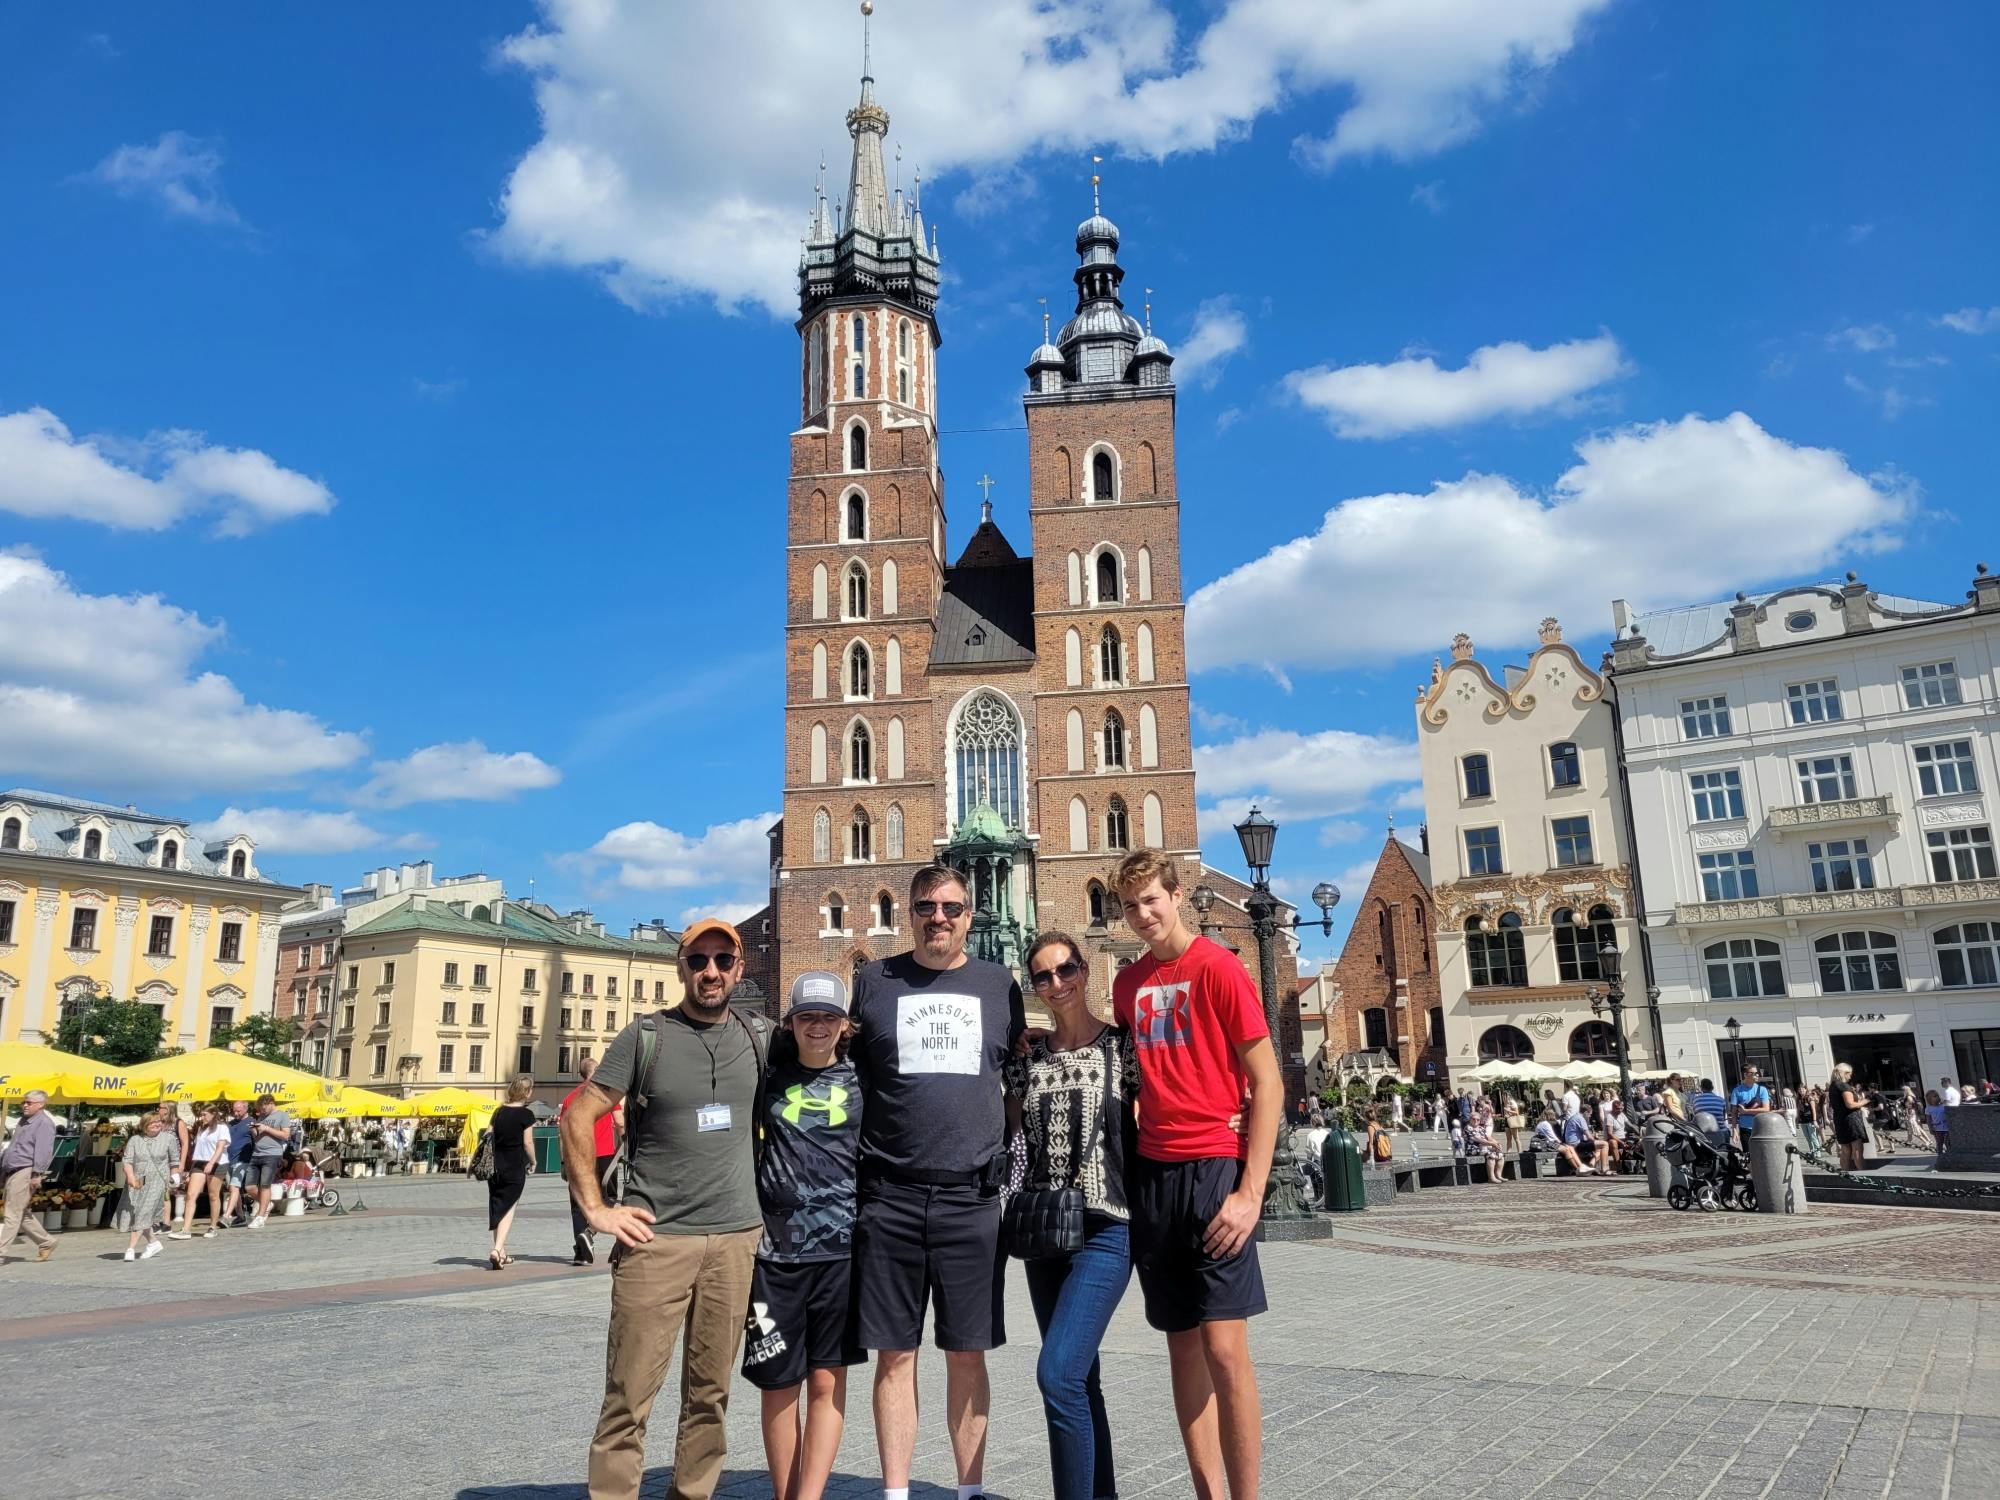 Full-day private tour of Krakow with Old Town and Jewish Quarter